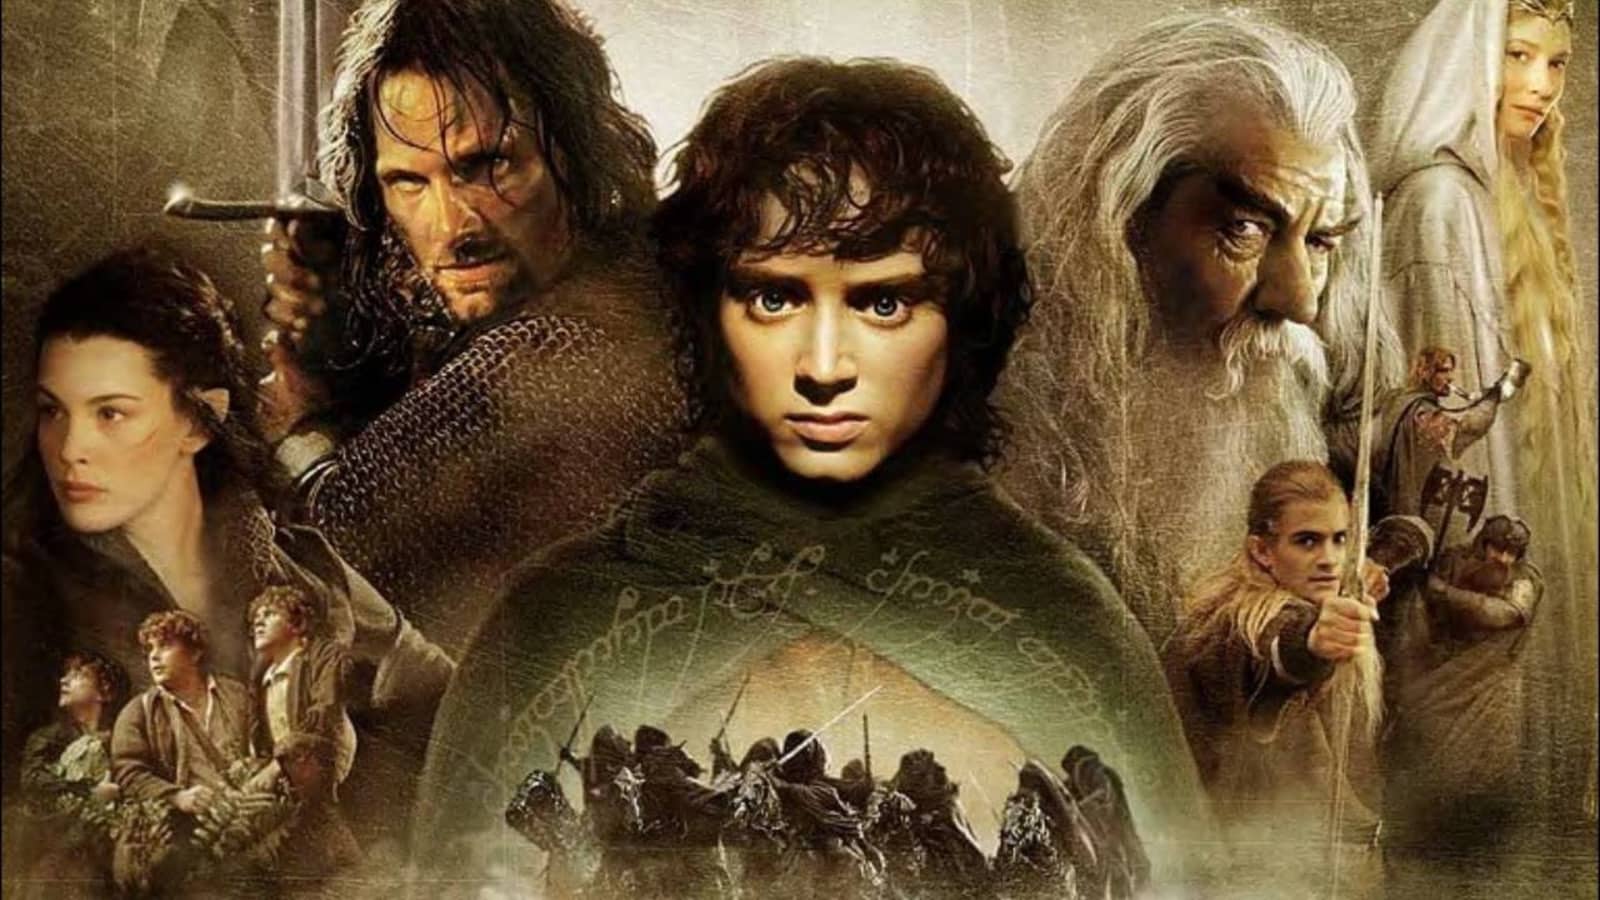 Lord of the Rings movies in order